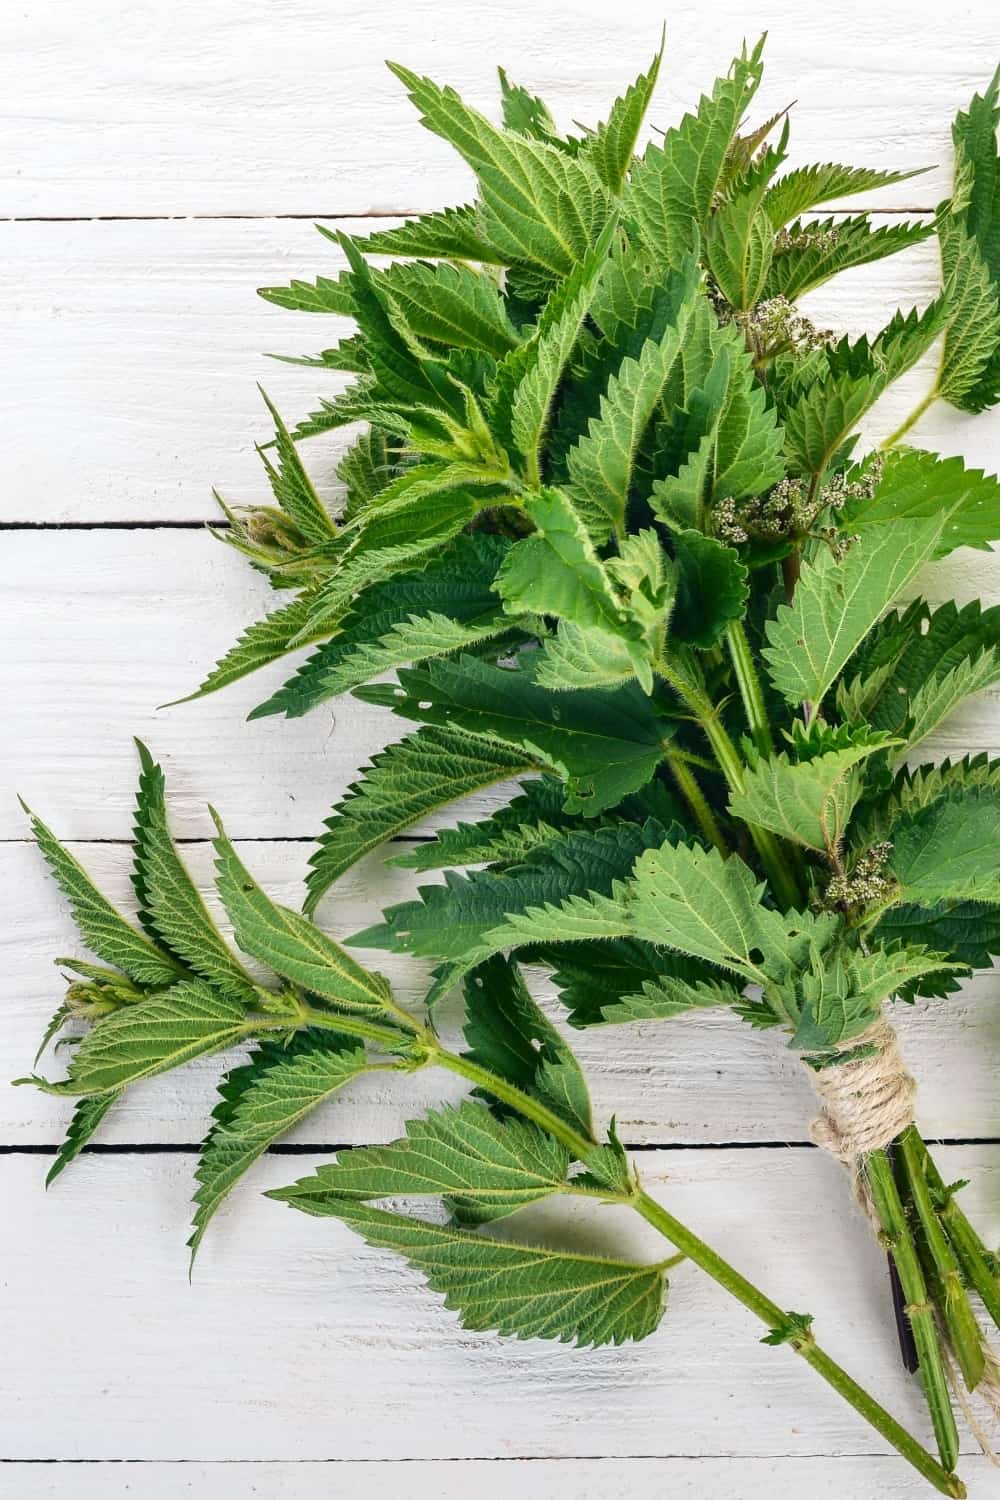 nettle on a wooden background